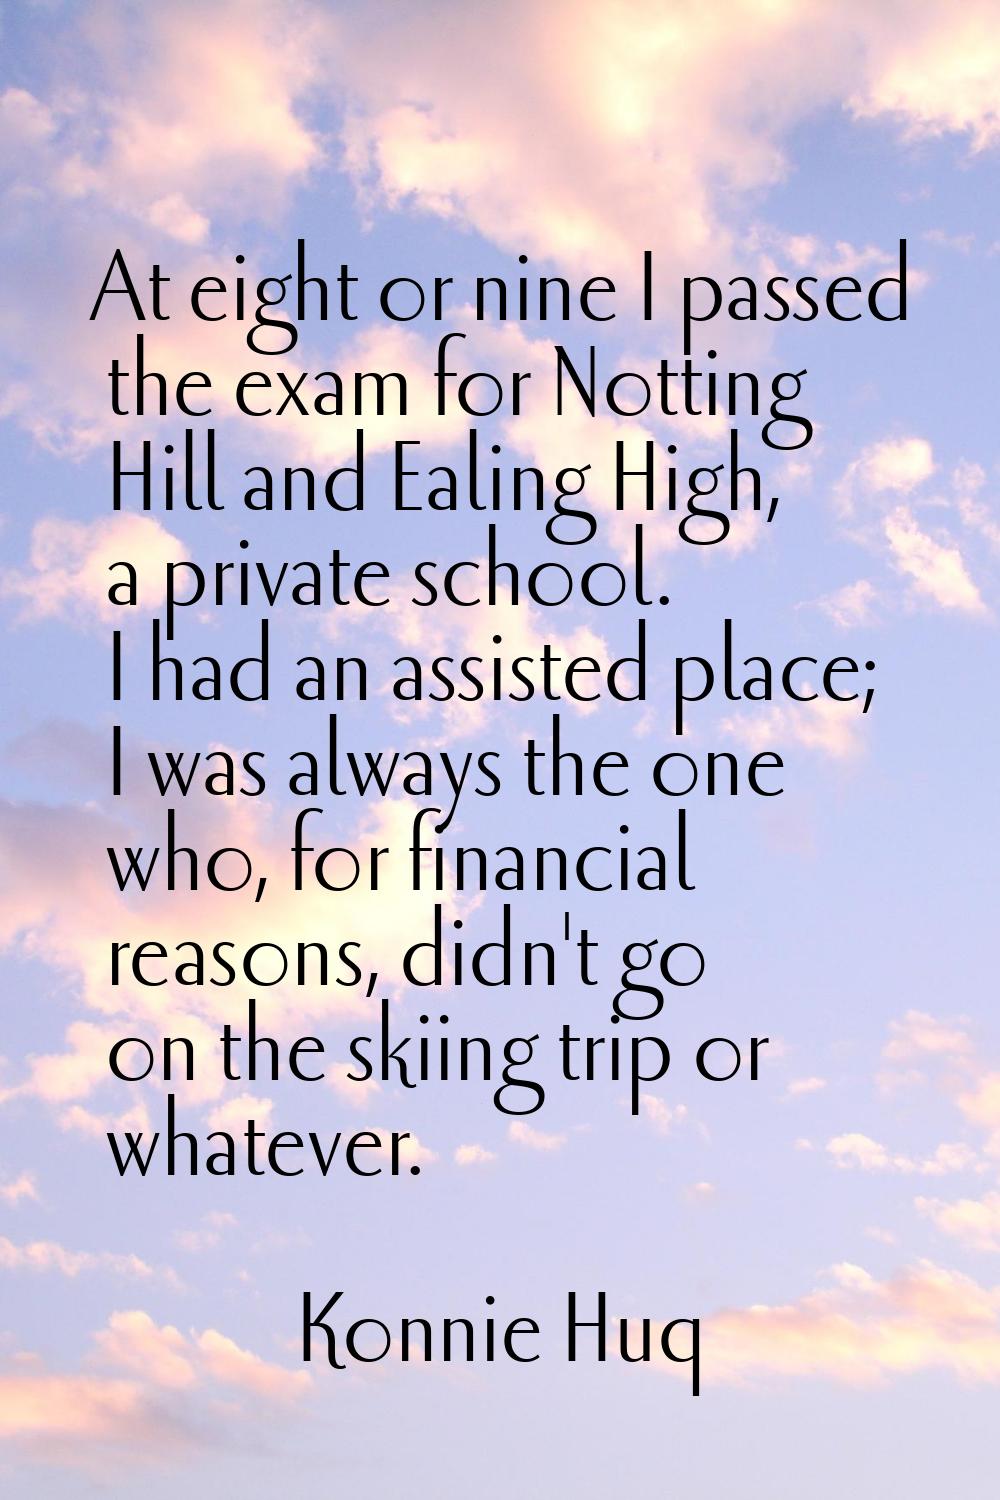 At eight or nine I passed the exam for Notting Hill and Ealing High, a private school. I had an ass